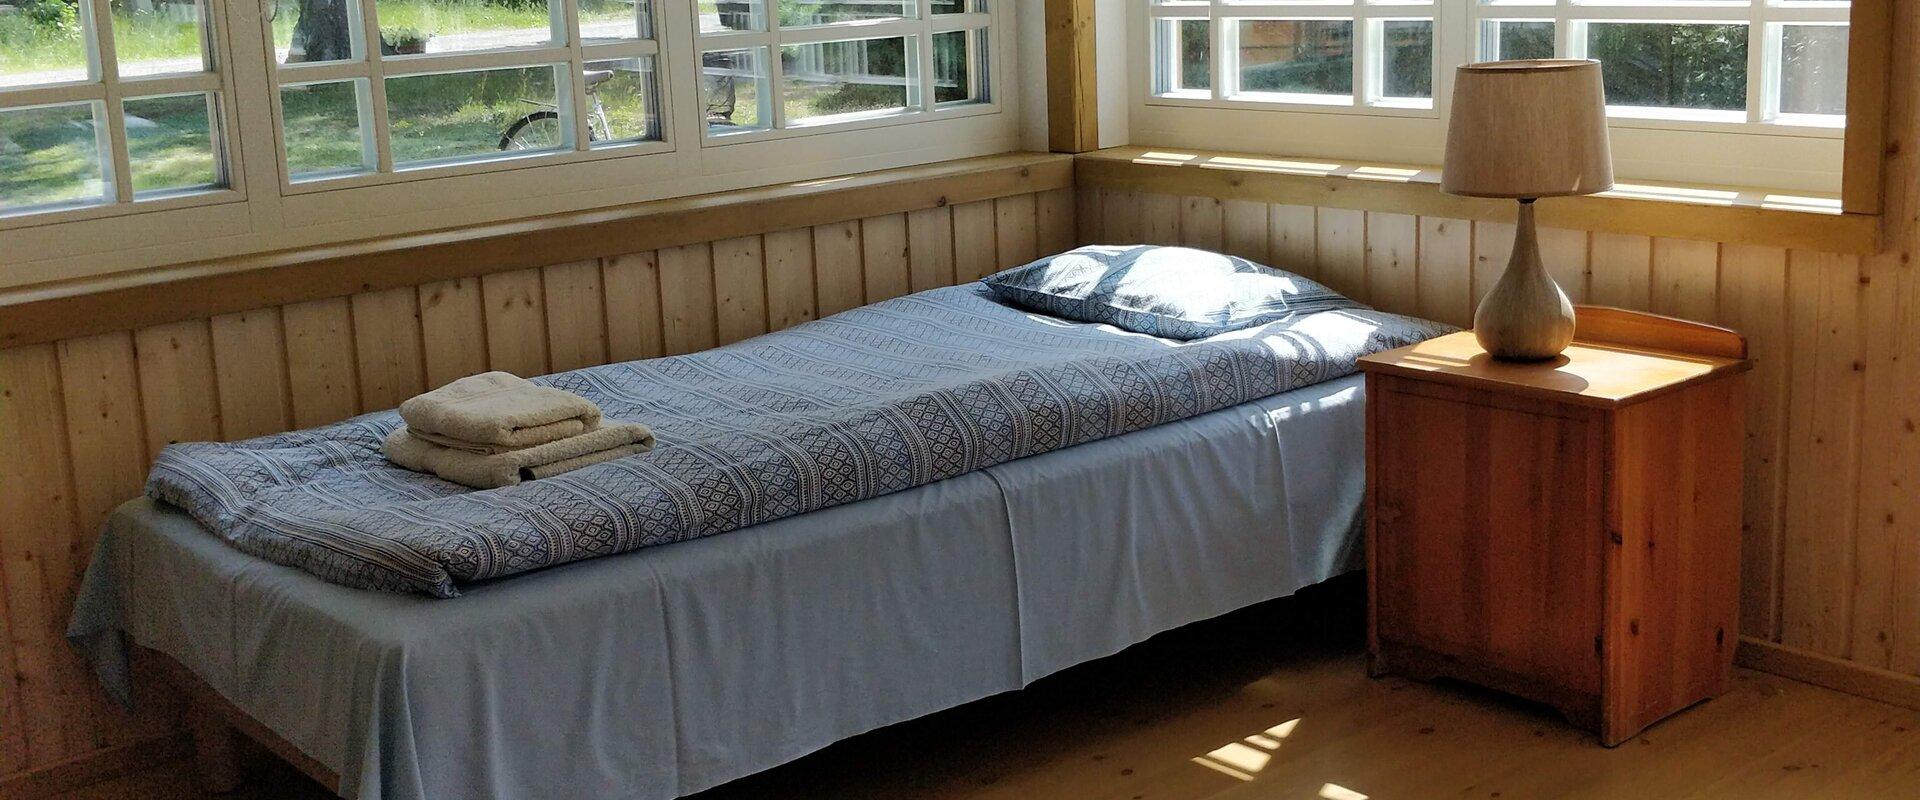 A bed in the Liise Farm porch room